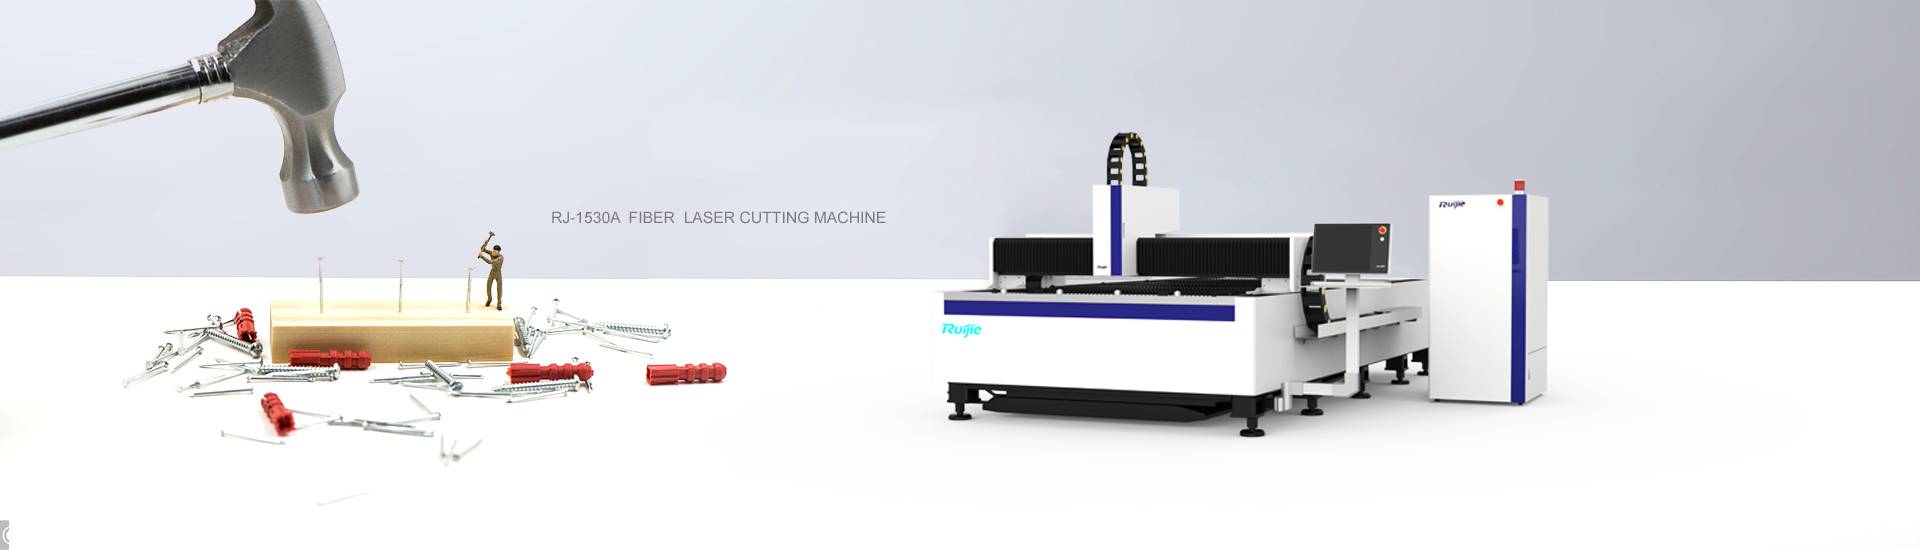 xTool M1 Laser & Blade Cutting Machine review - Fire the lasers! - The Gadgeteer